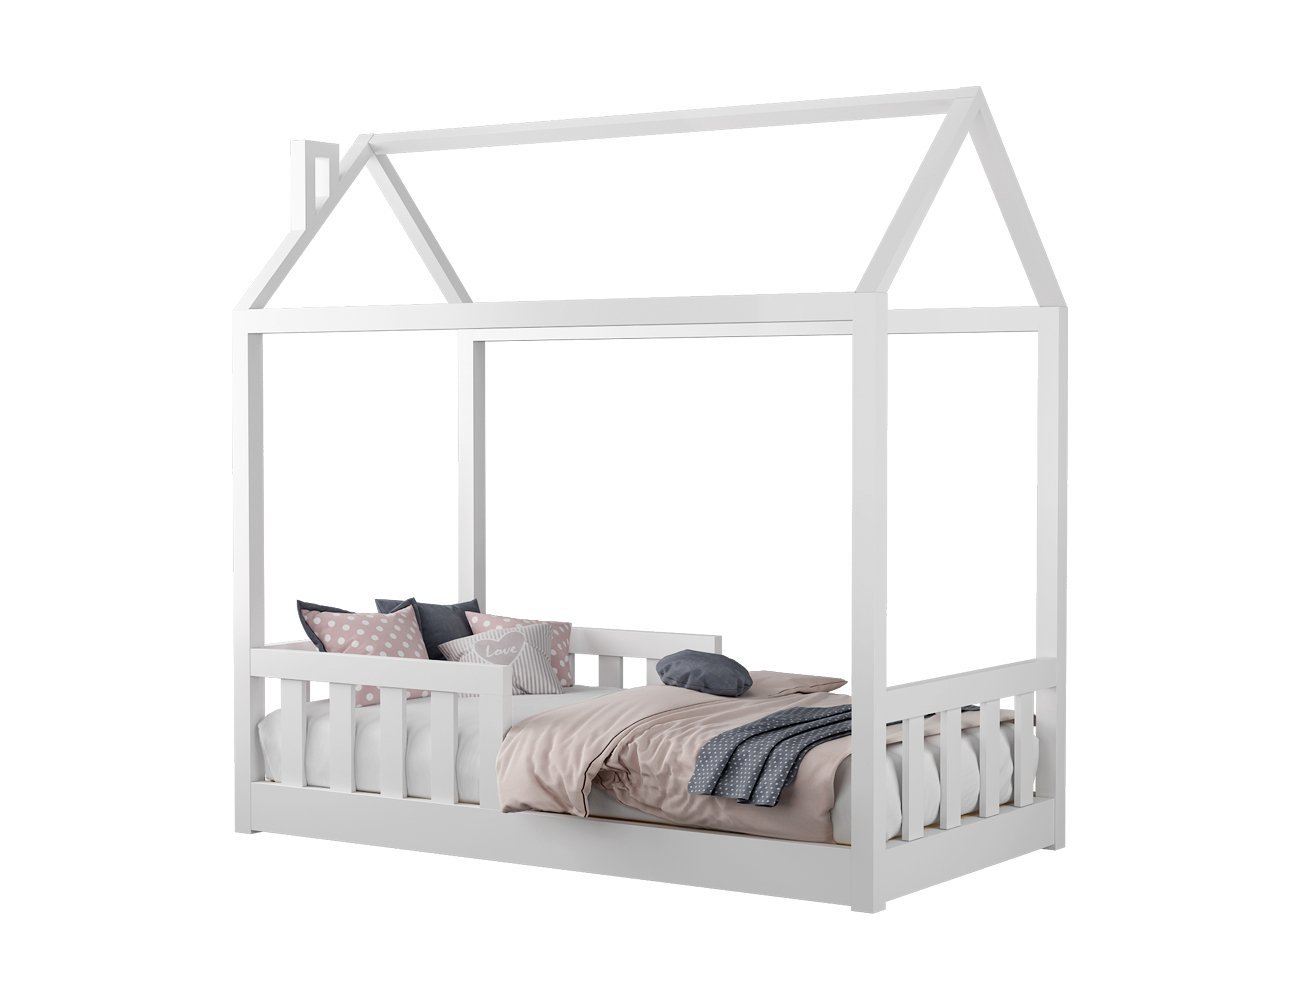 Ami Kids Single Bed Frame @ Crazy Sales - We have the best daily deals ...